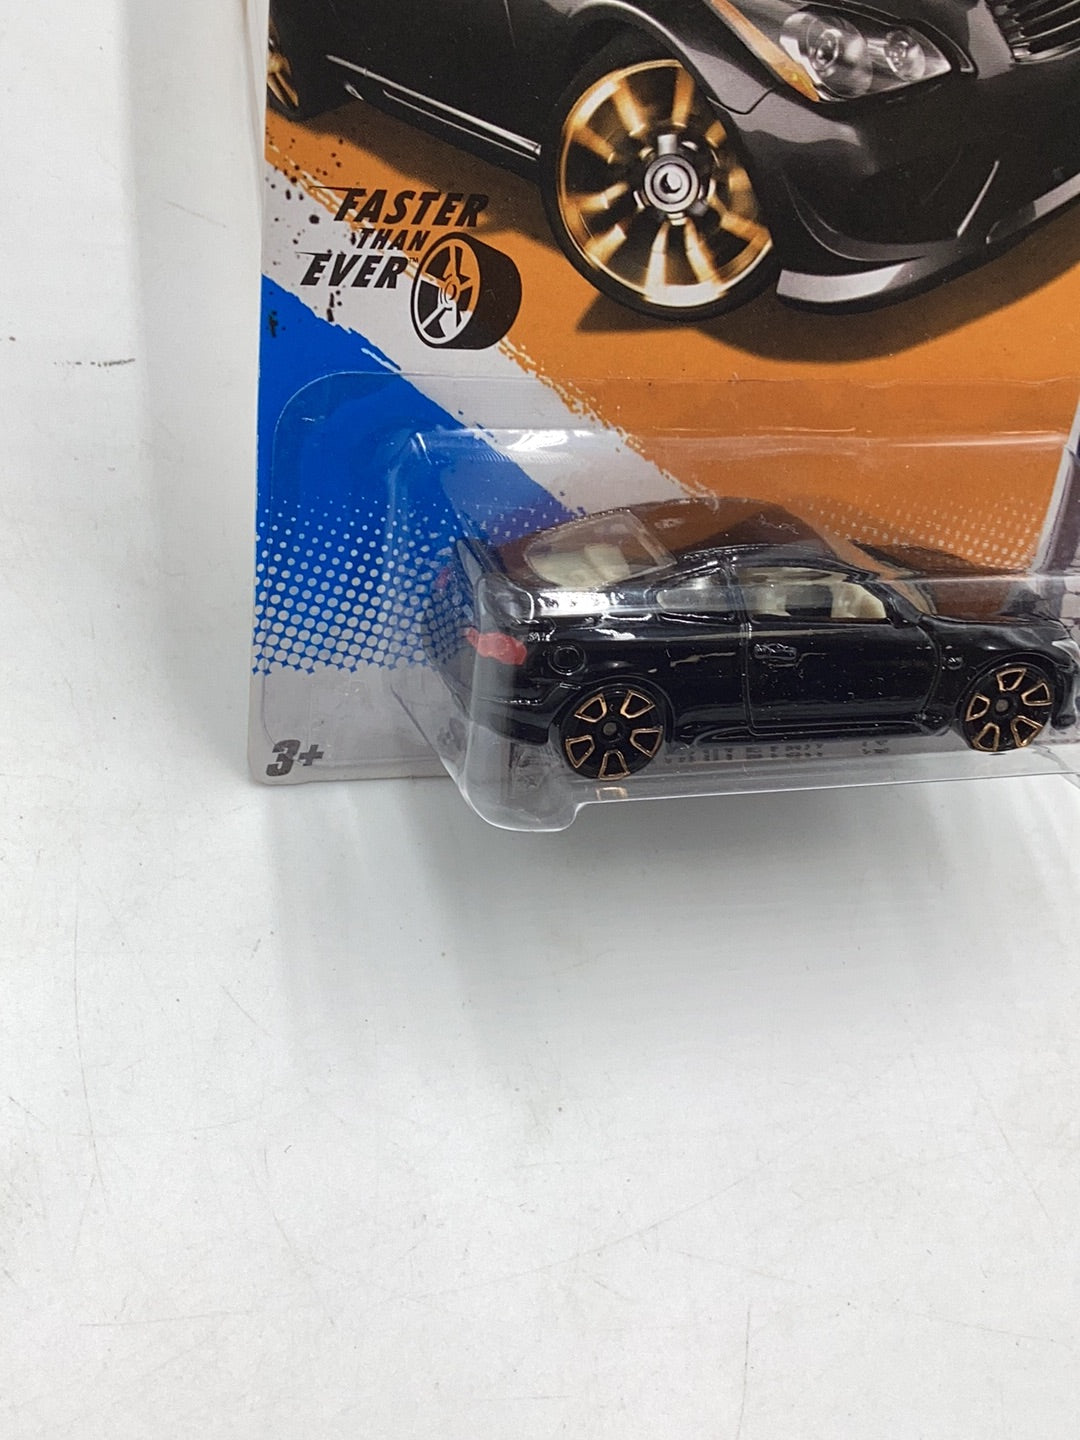 2012 Hot Wheels #94 Infiniti G37 Faster than ever FTE2s Black small crease with protector